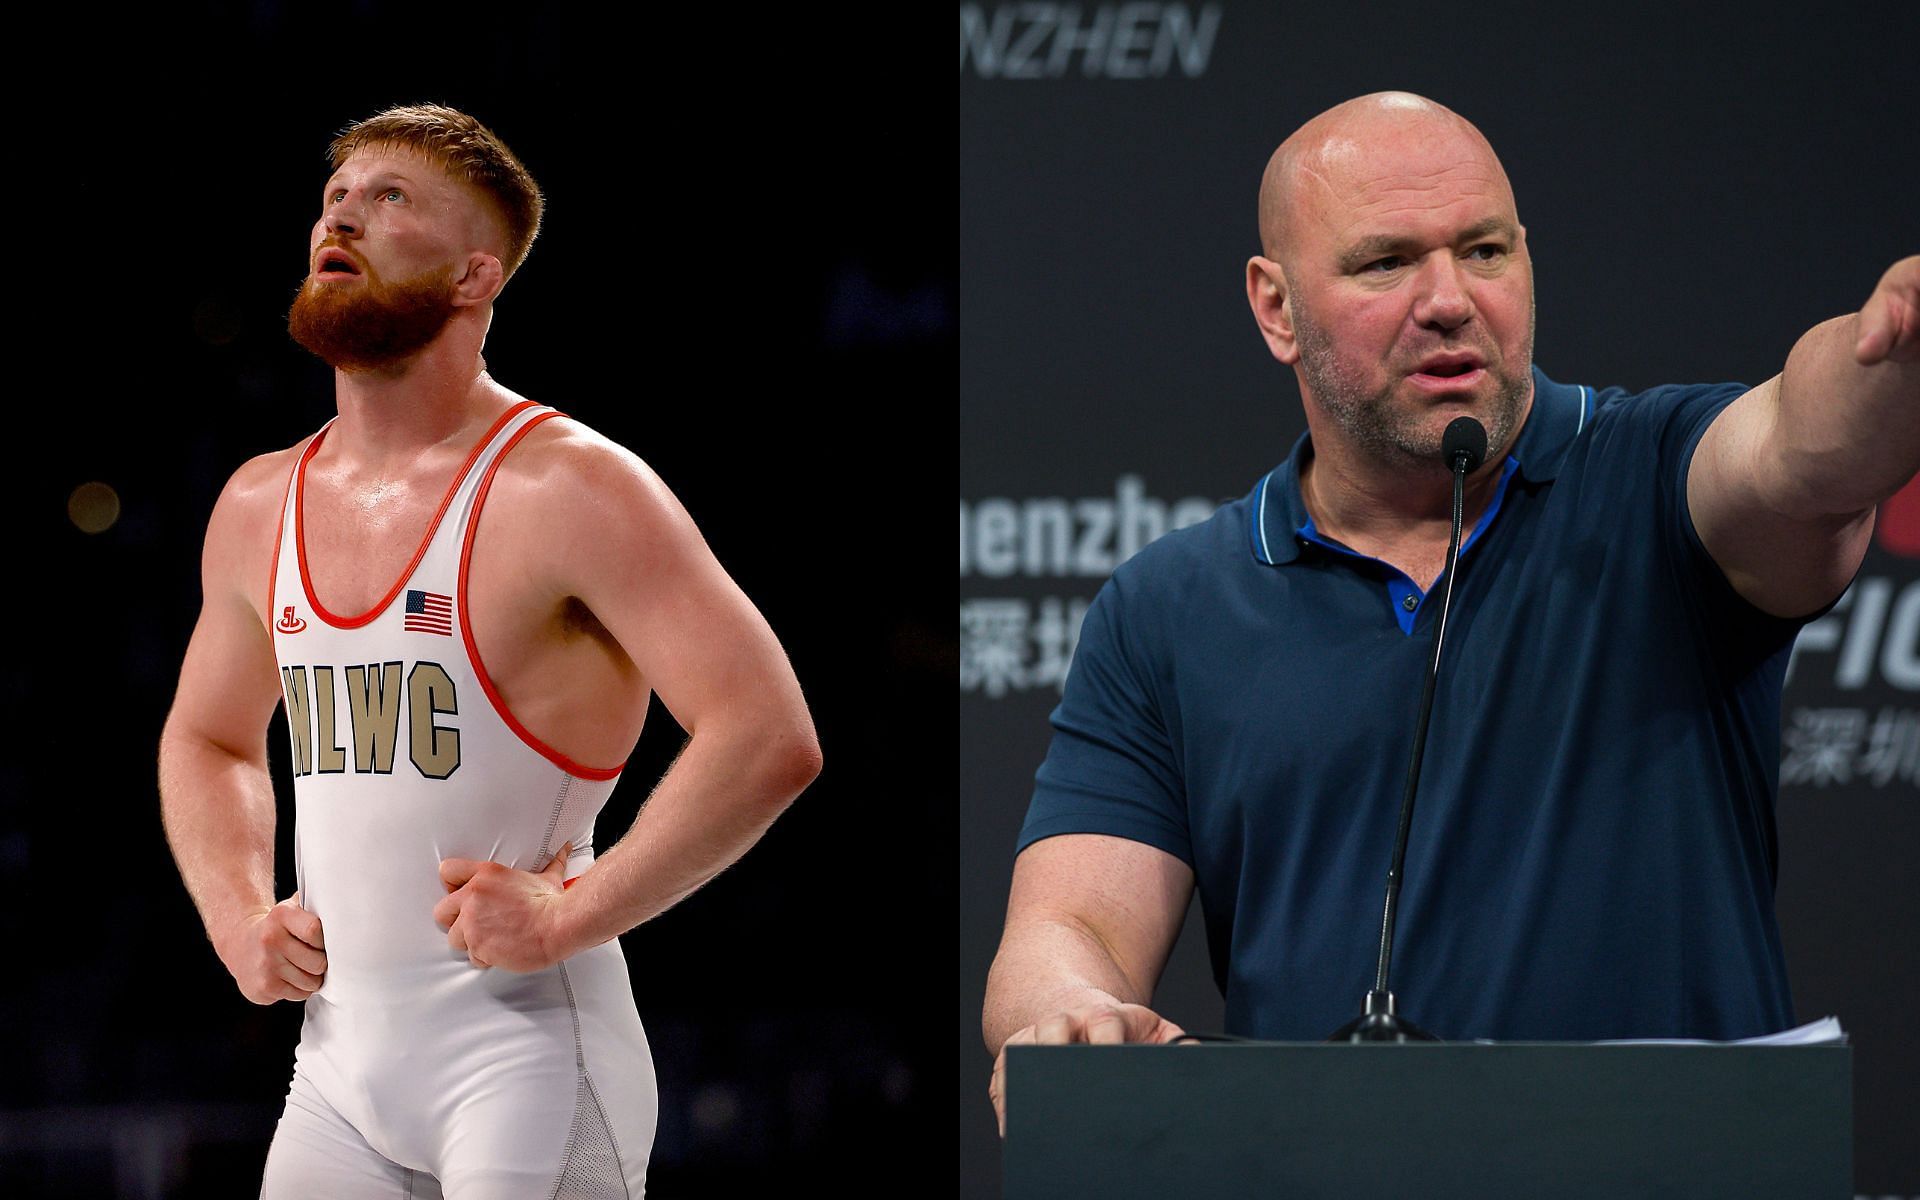 Bo Nickal (left) and Dana White (right) (Image credits Getty Images)